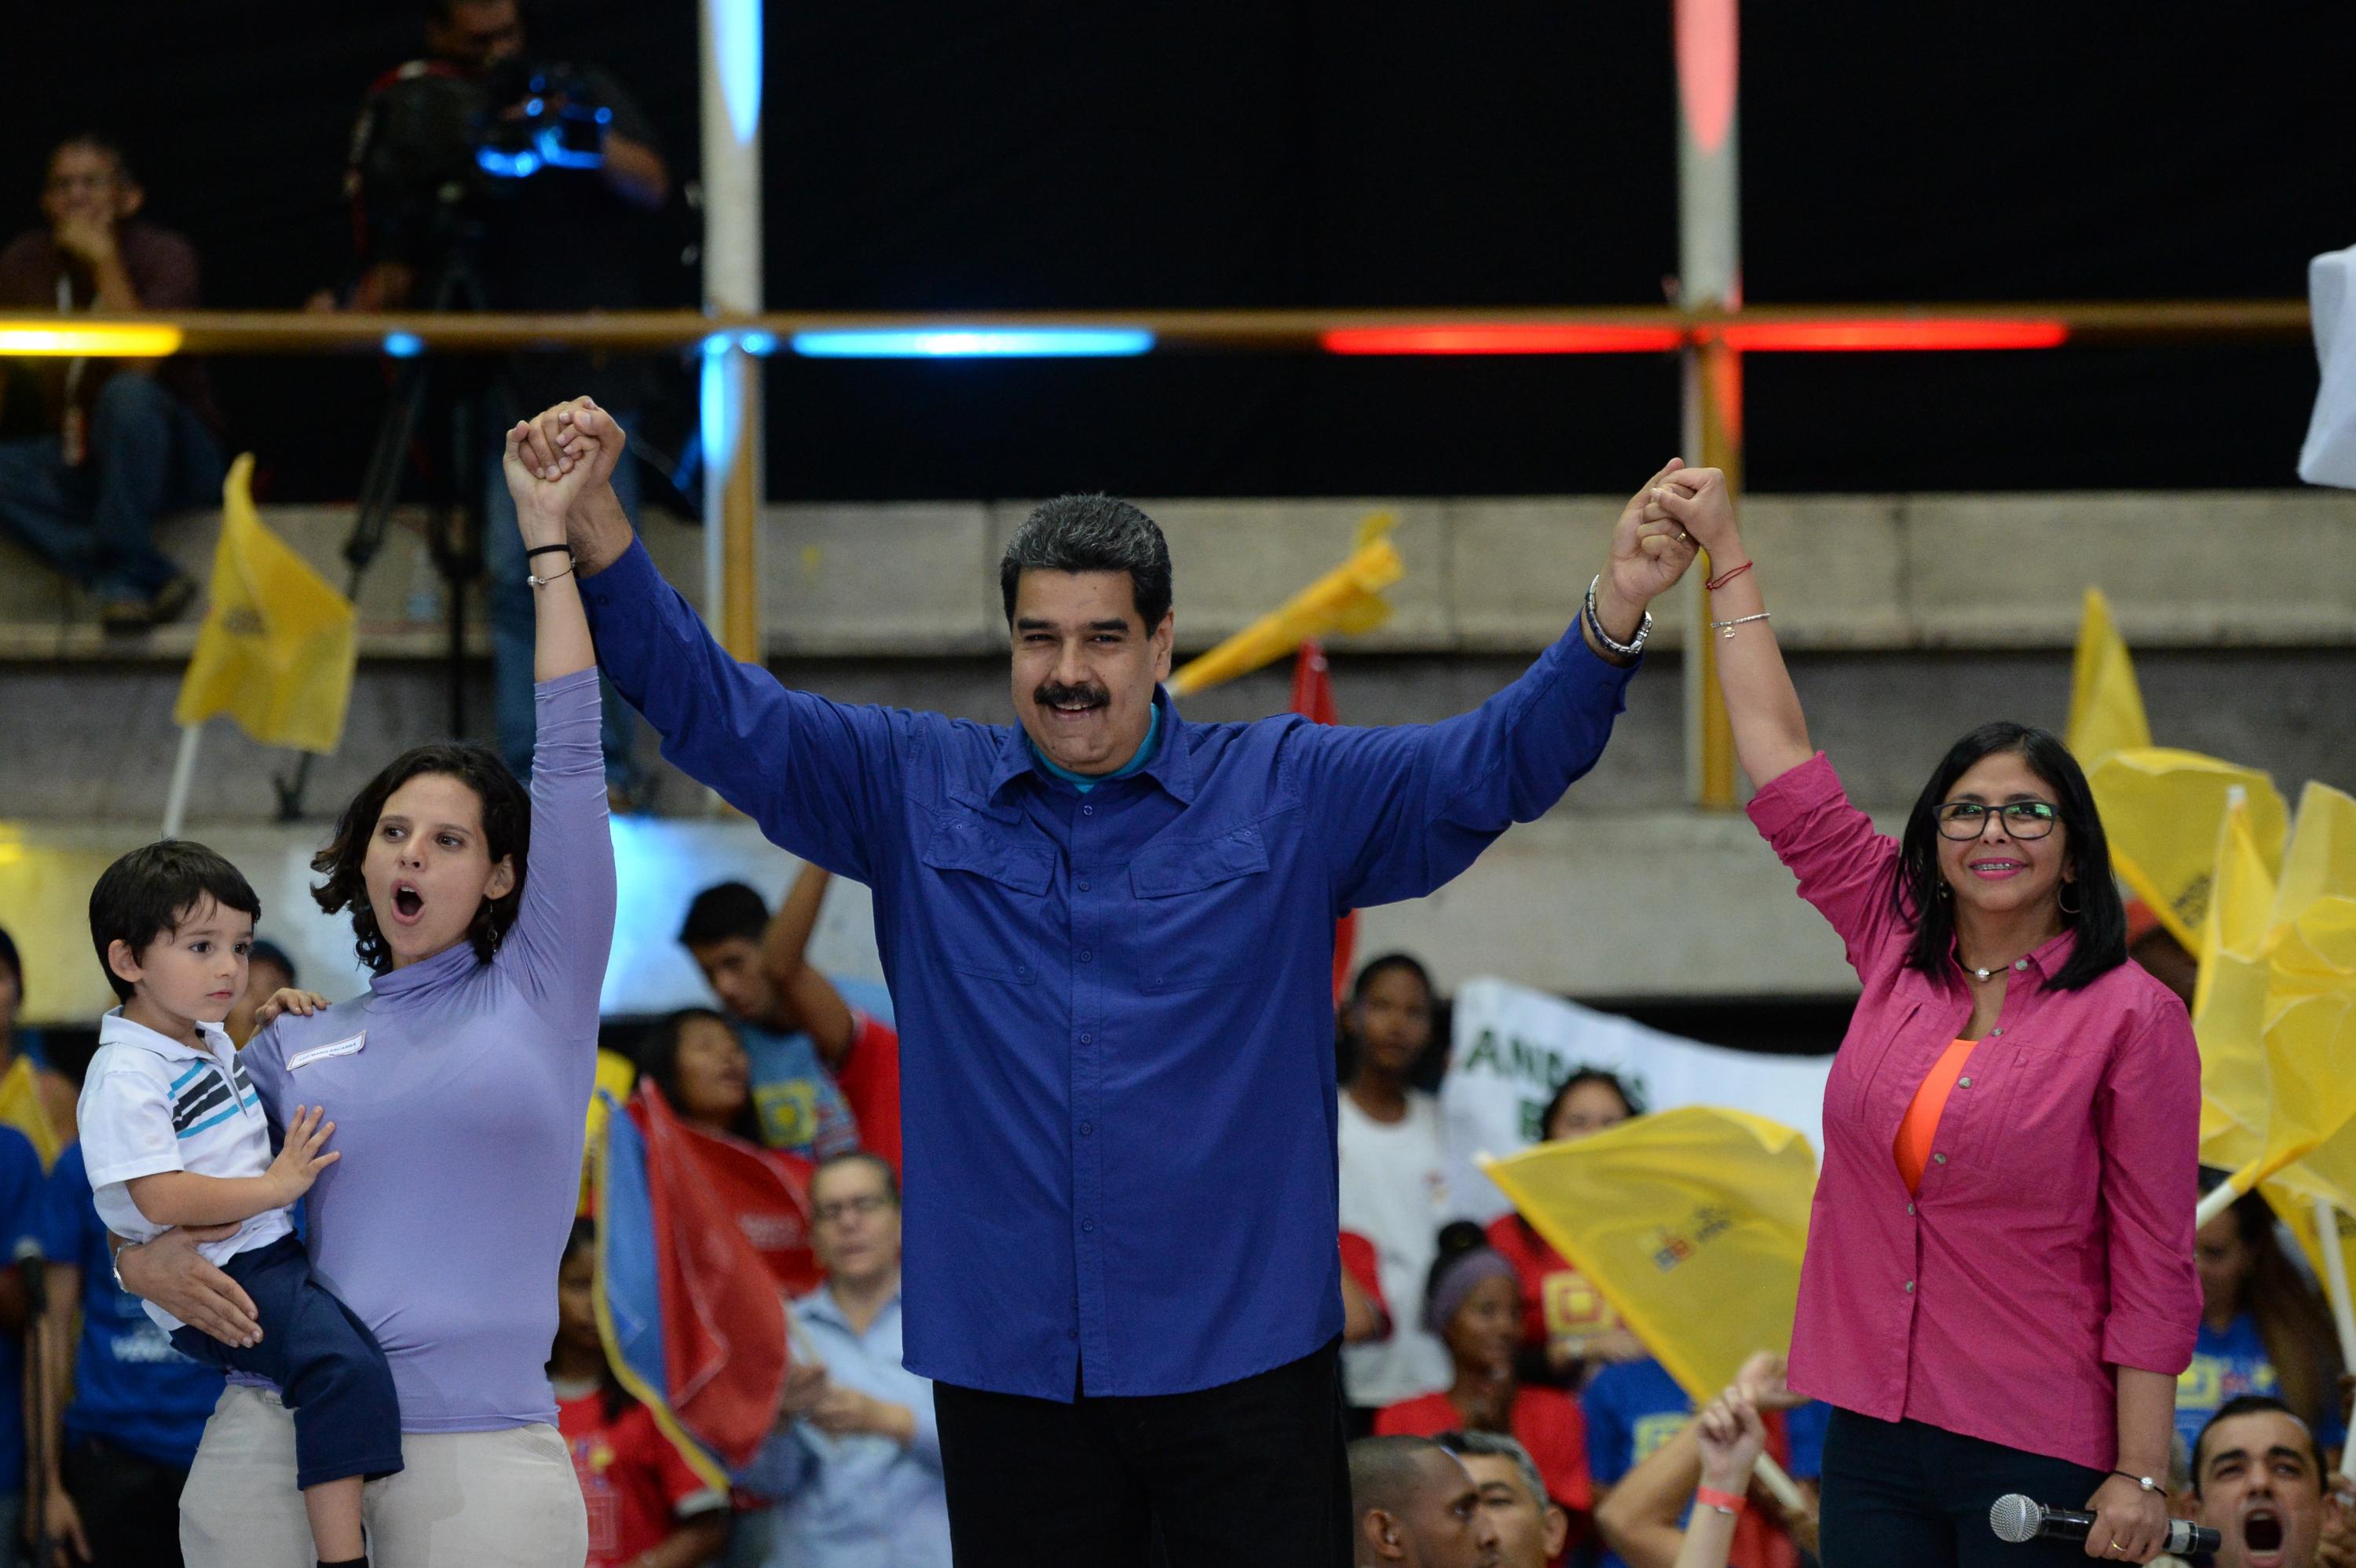 Venezuelan President Nicolas Maduro (C), the head of the Constituent Assemby, Delcy Rodriguez (R) and a supporter raise hands during a rally in Caracas on February 7, 2018. Maduro launched Wednesday a political movement to promote his candidacy for reelection. / AFP PHOTO / FEDERICO PARRA